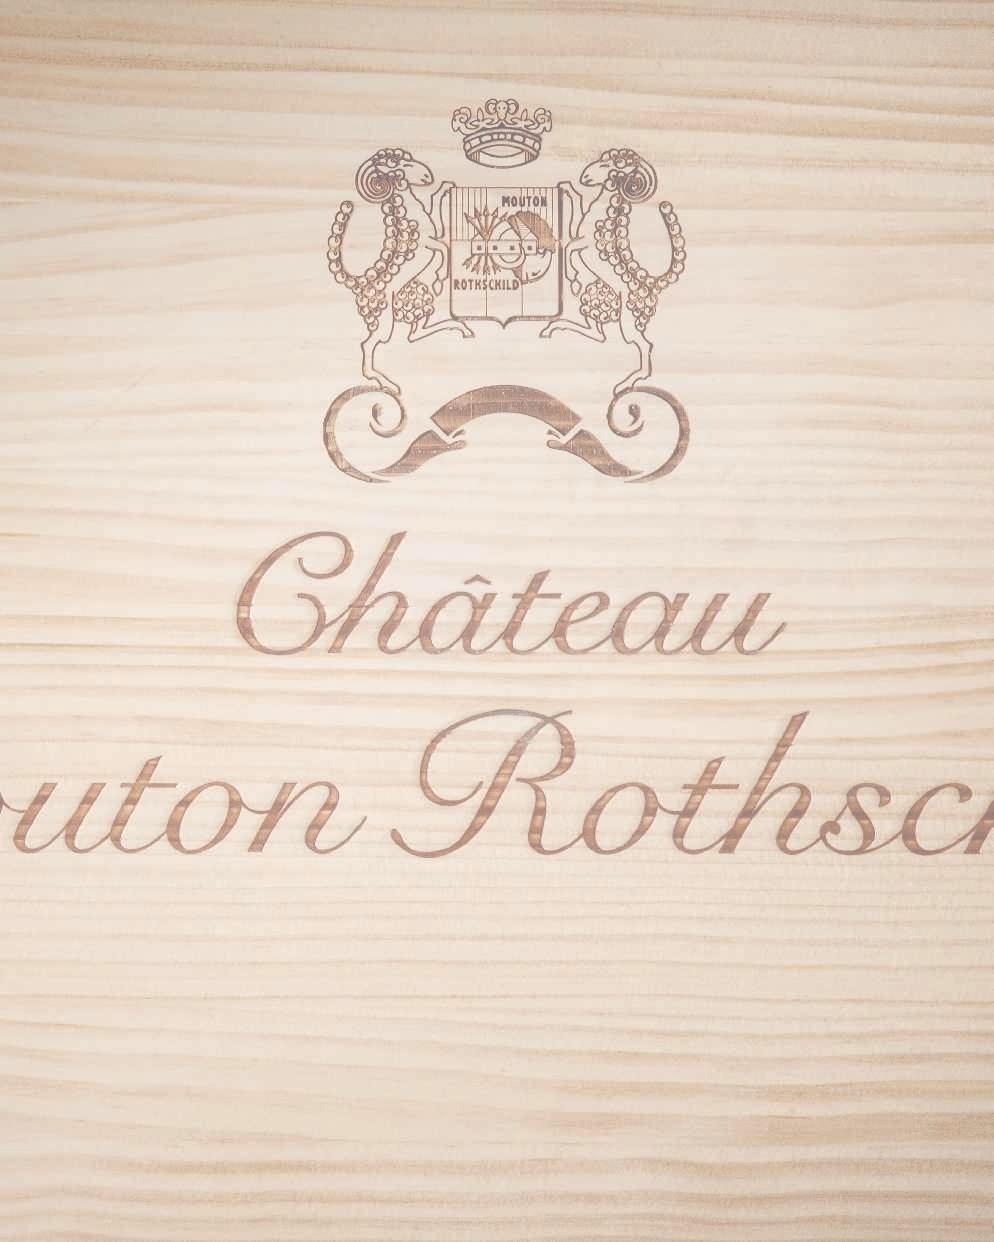 Lot 89 Lot 89 89 Château Mouton-Rothschild 1945 Pauillac, 1er cru classé In Château wooden case. Re-conditioned in 2011 / 2012. New tissues, one piece label.